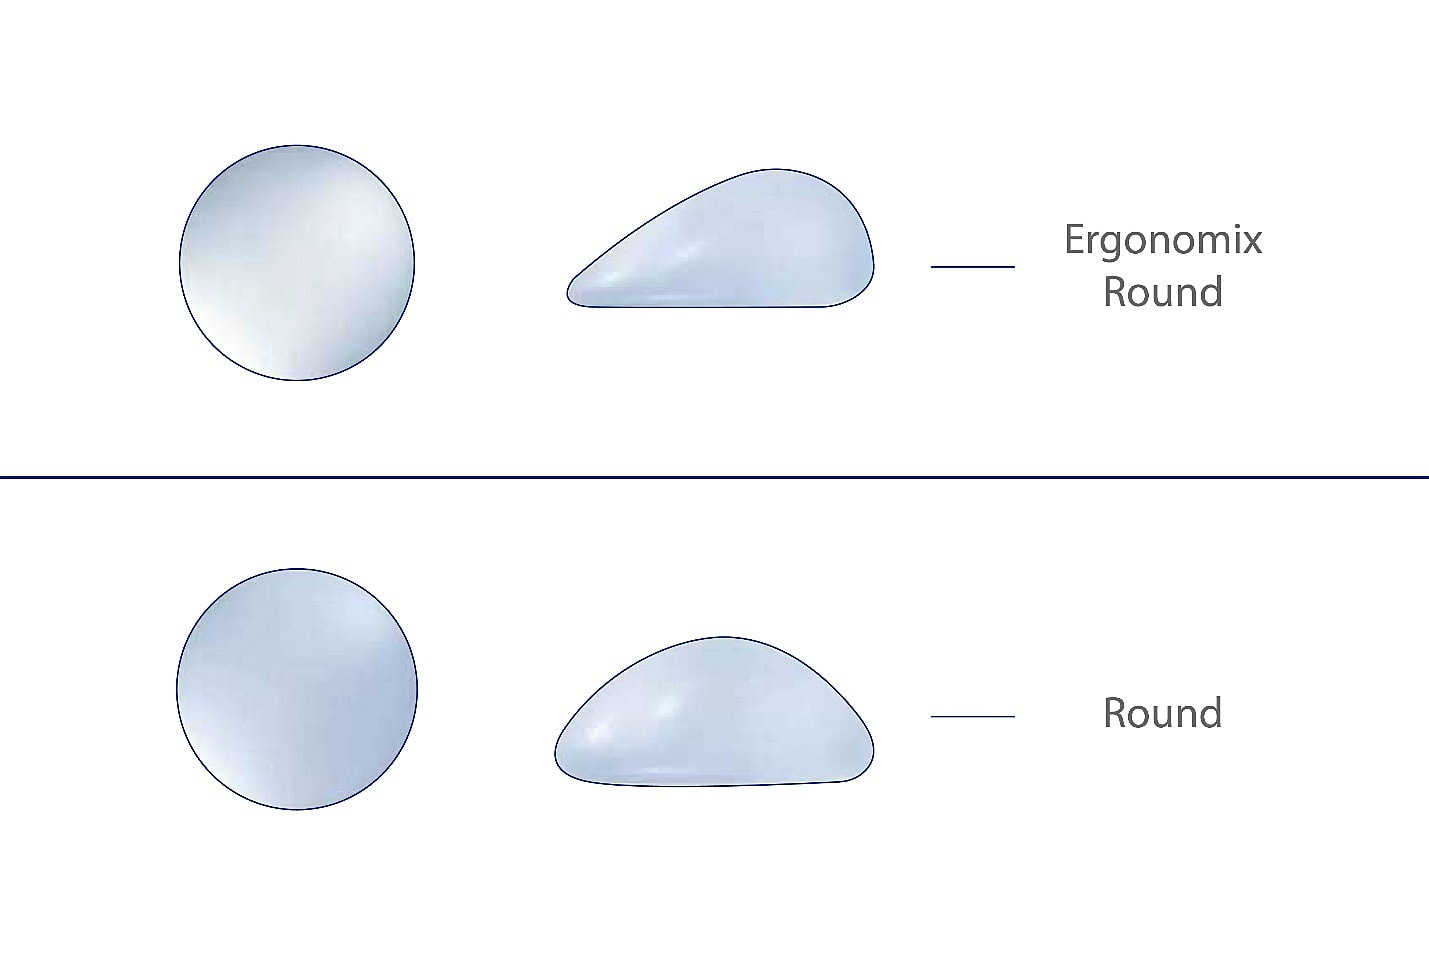 Types Of Breast Implants Available In Motiva